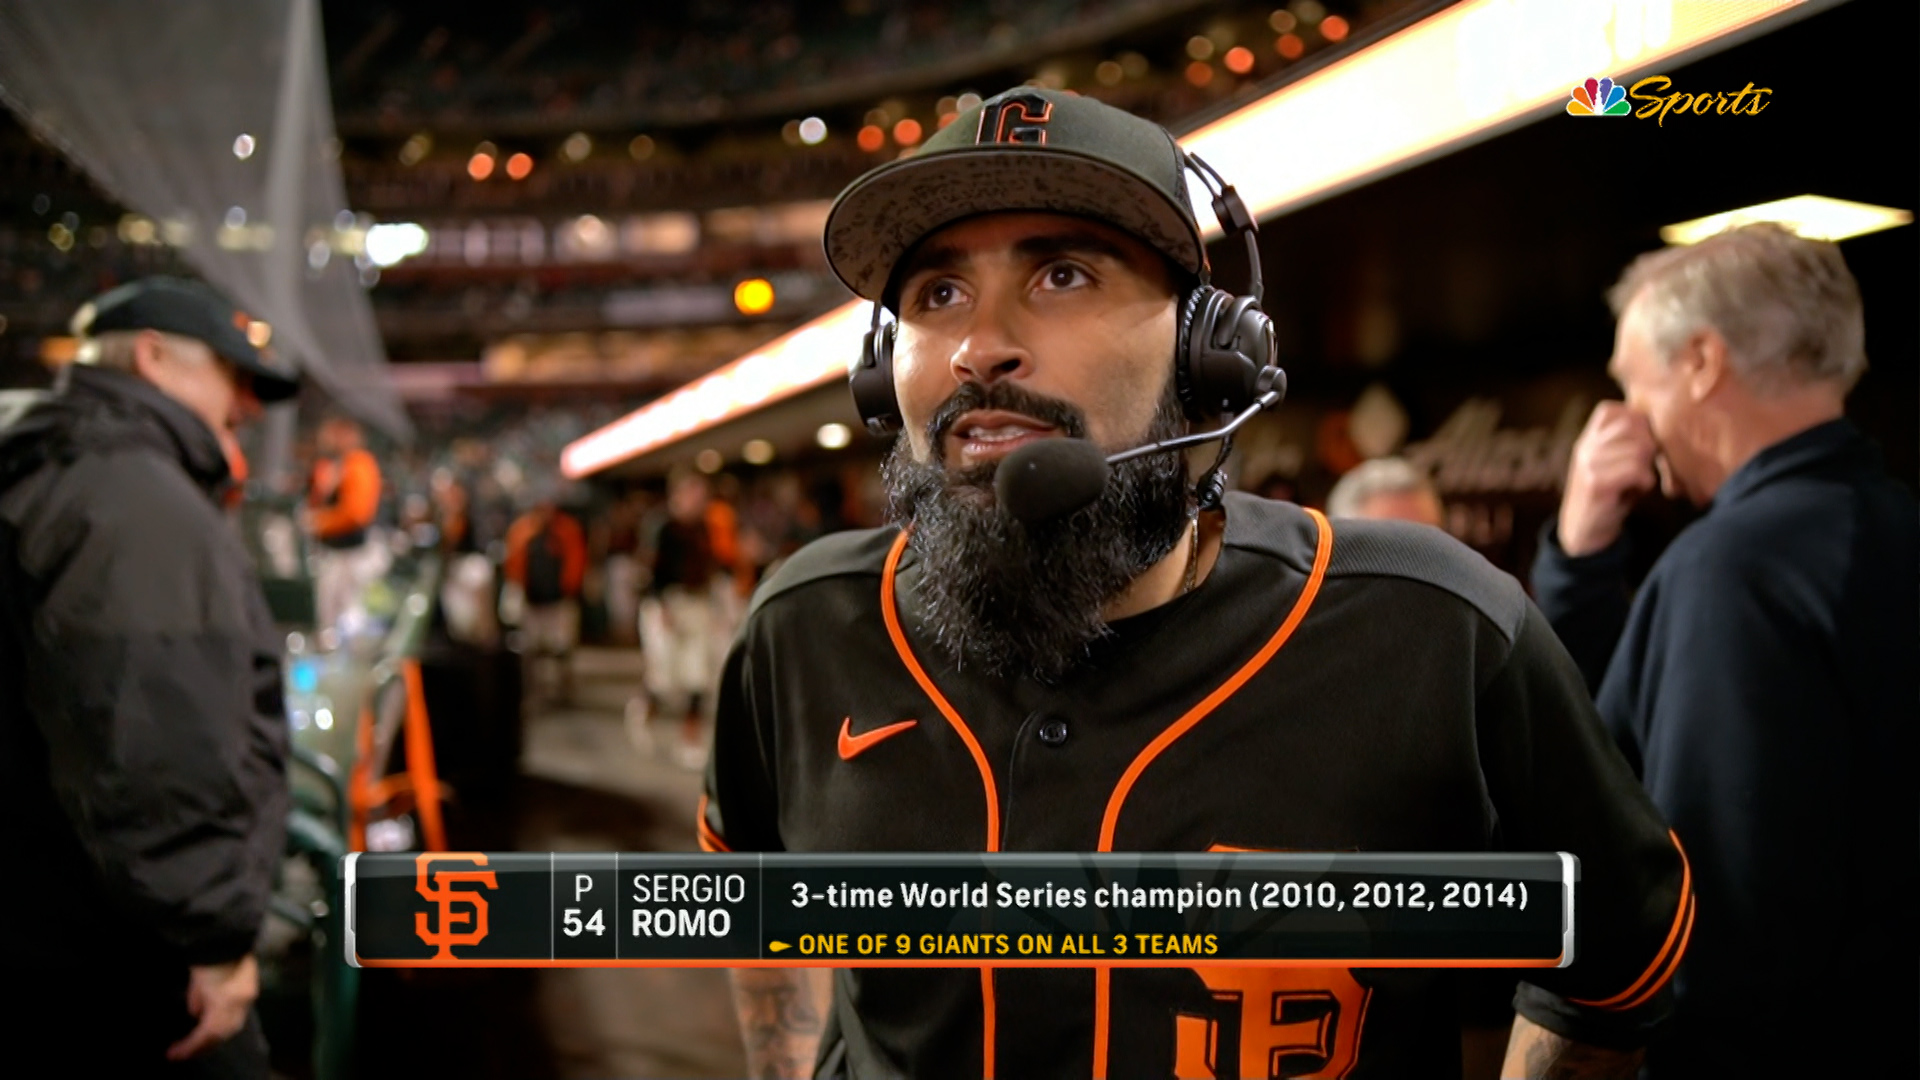 Sergio Romo retires as Giant after pitching one final time, Sports